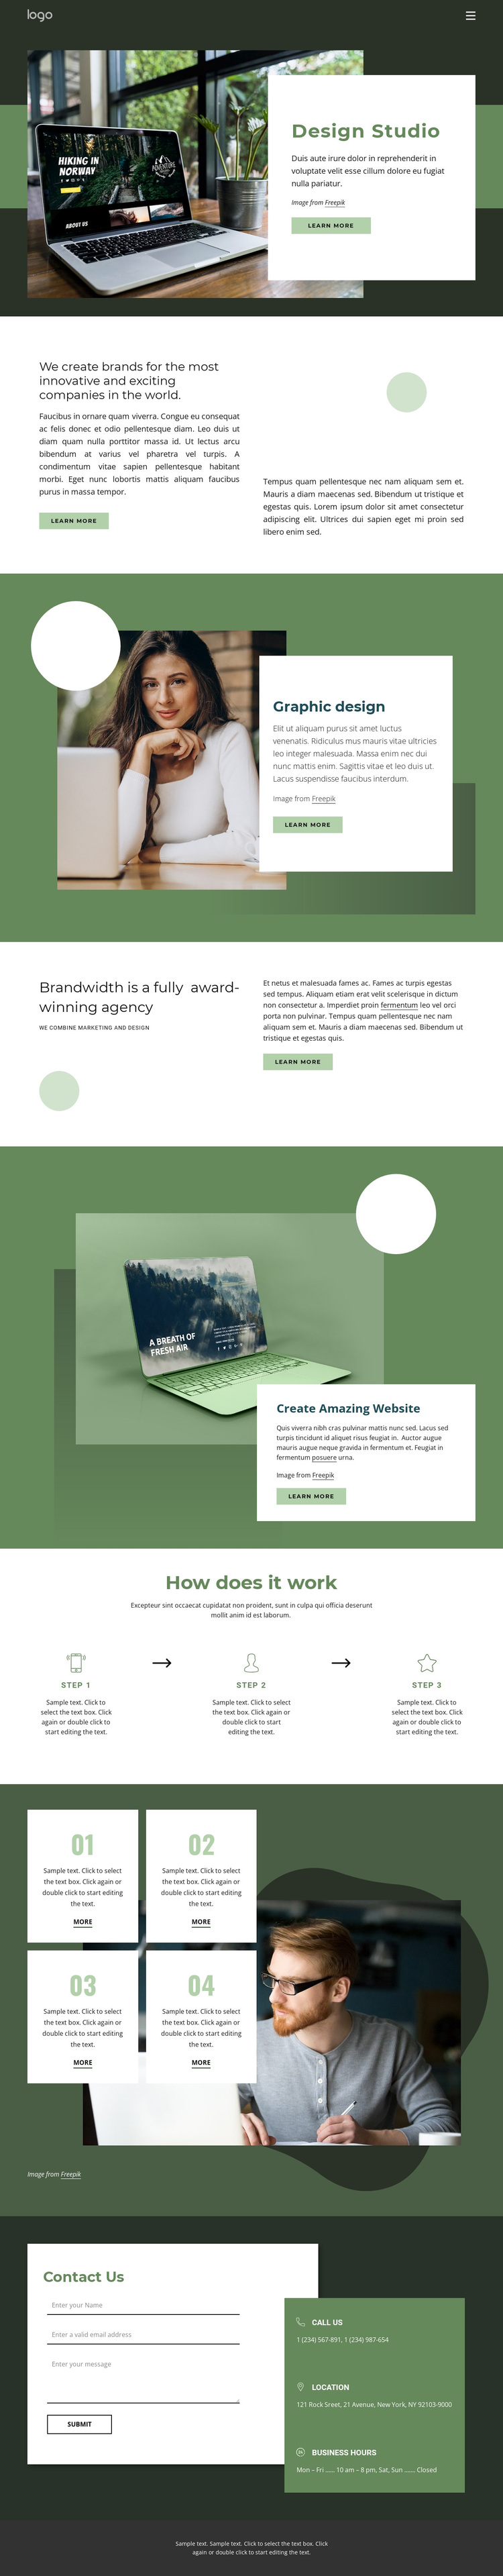 Design inspiration from nature Template